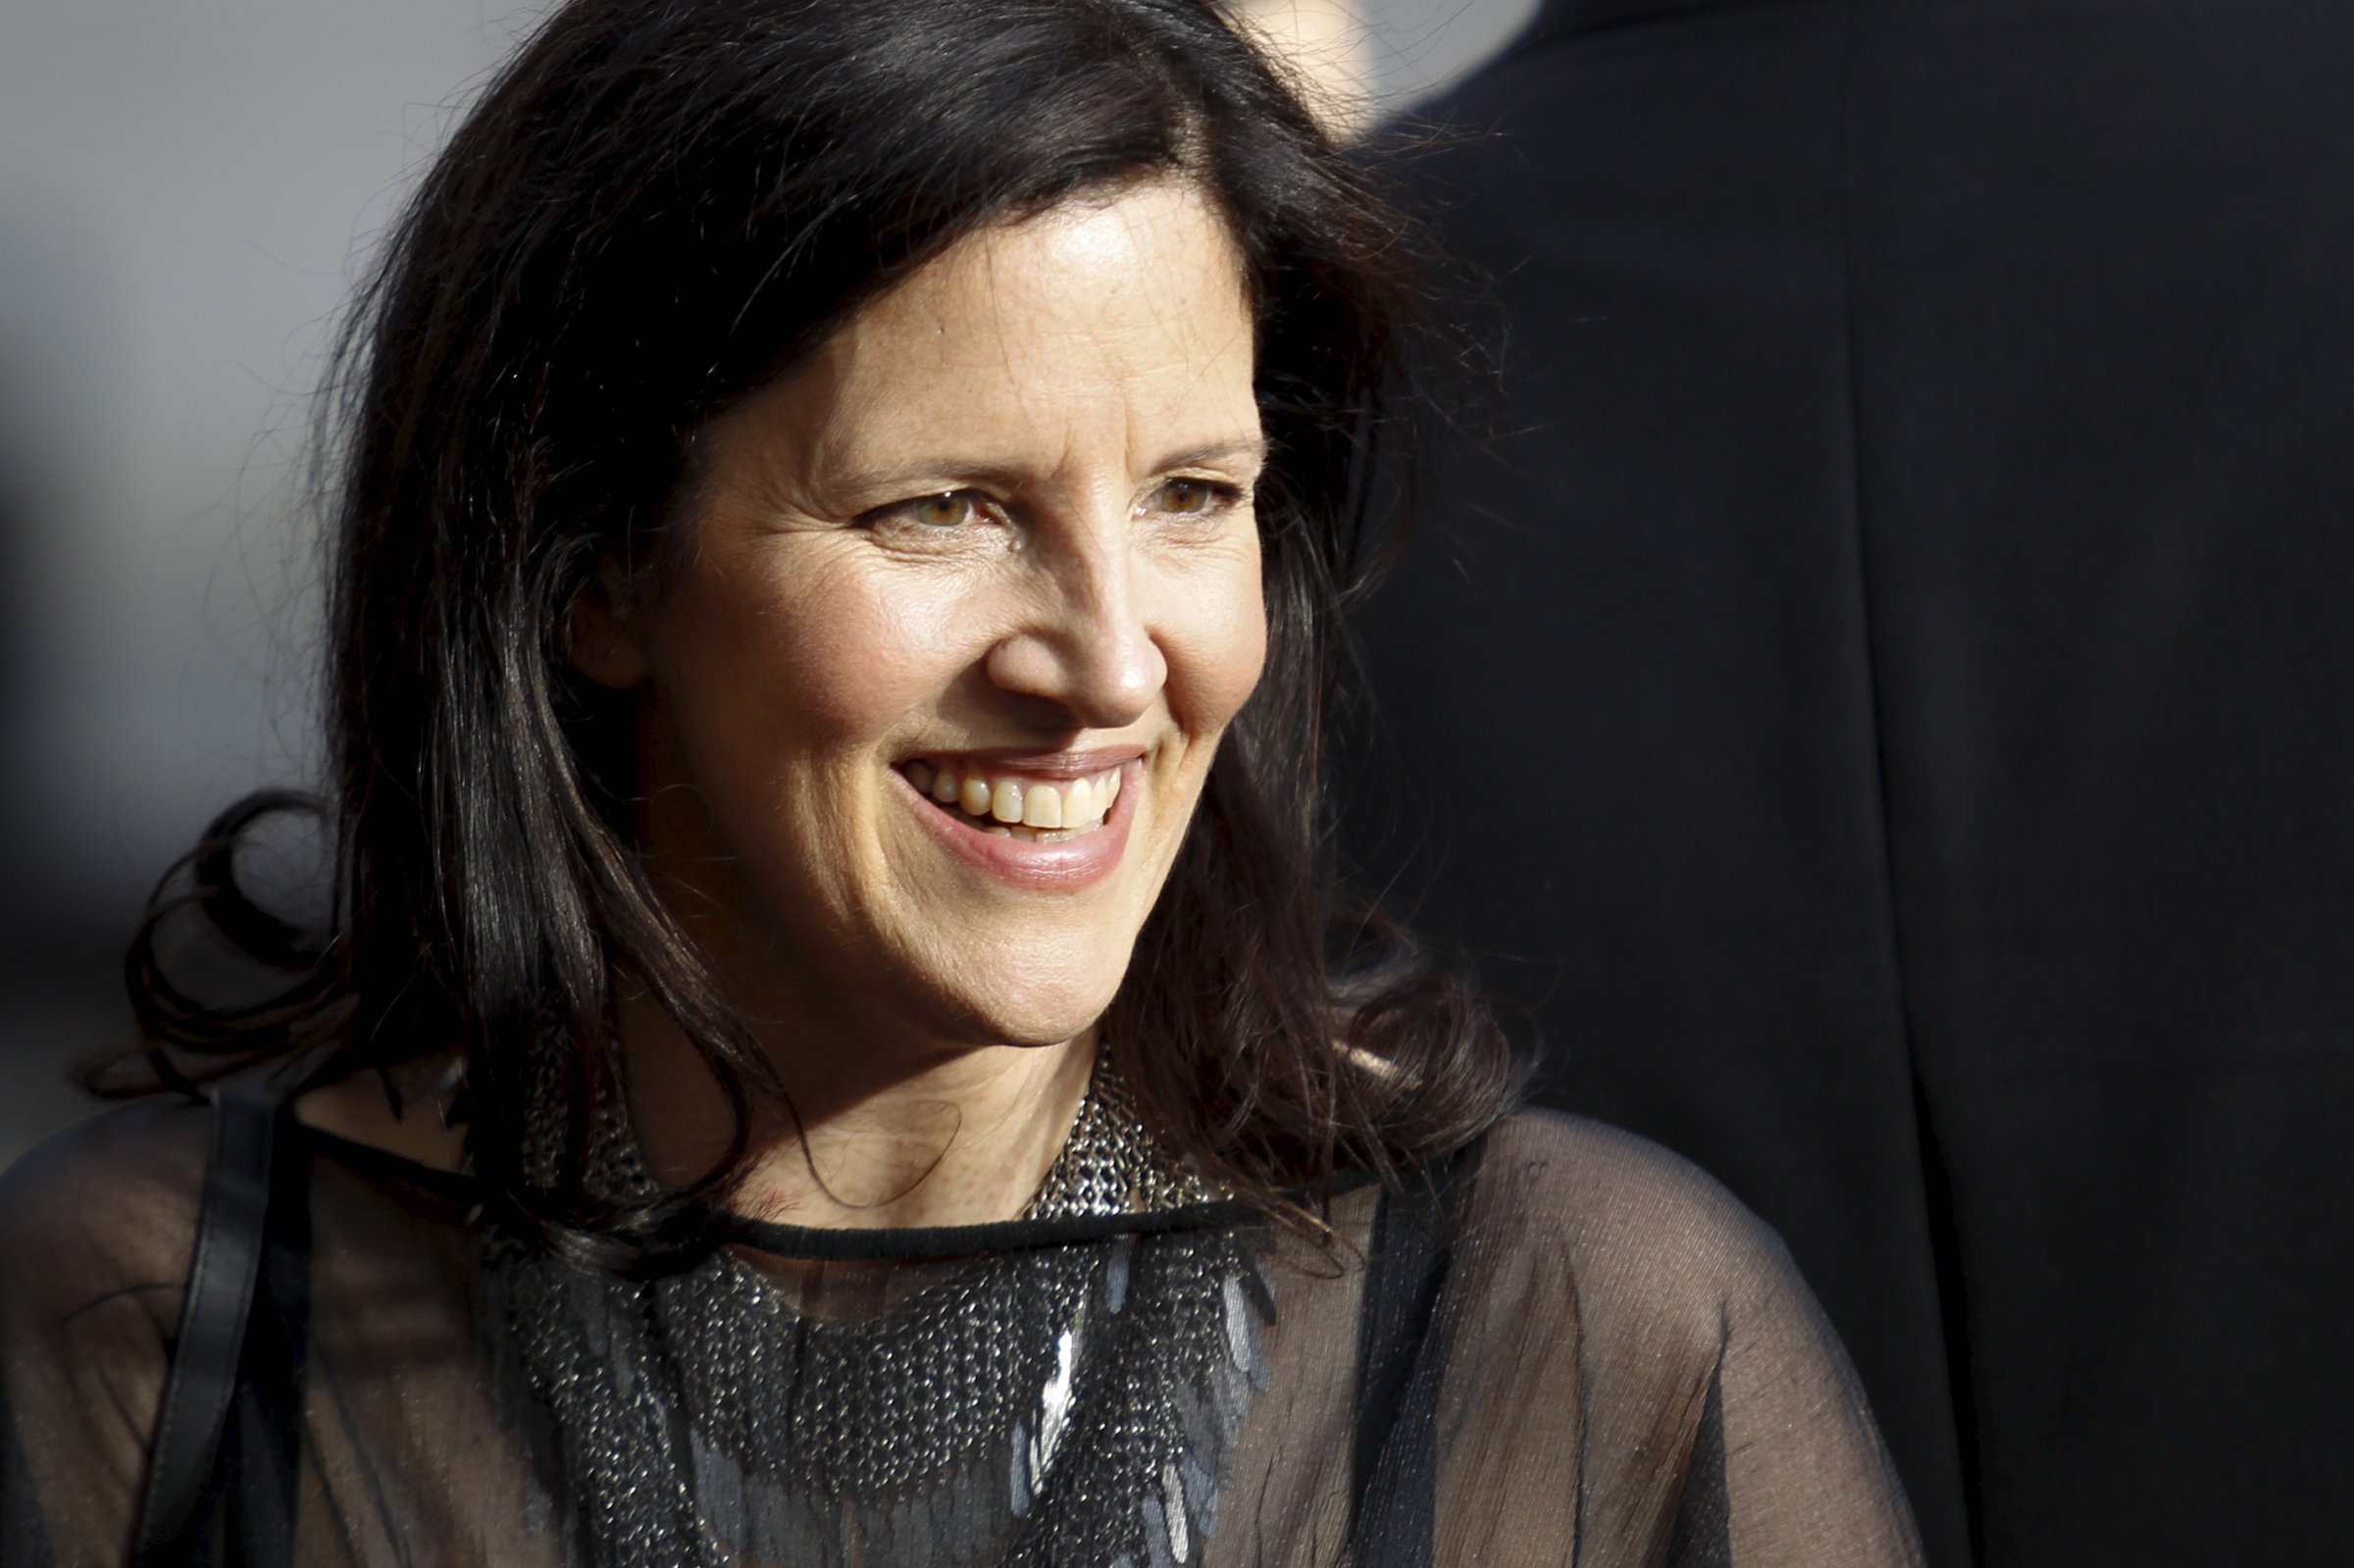 Director Laura Poitras arrives to attend the Chaplin award at Alice Tully Hall in New York April 27, 2015.